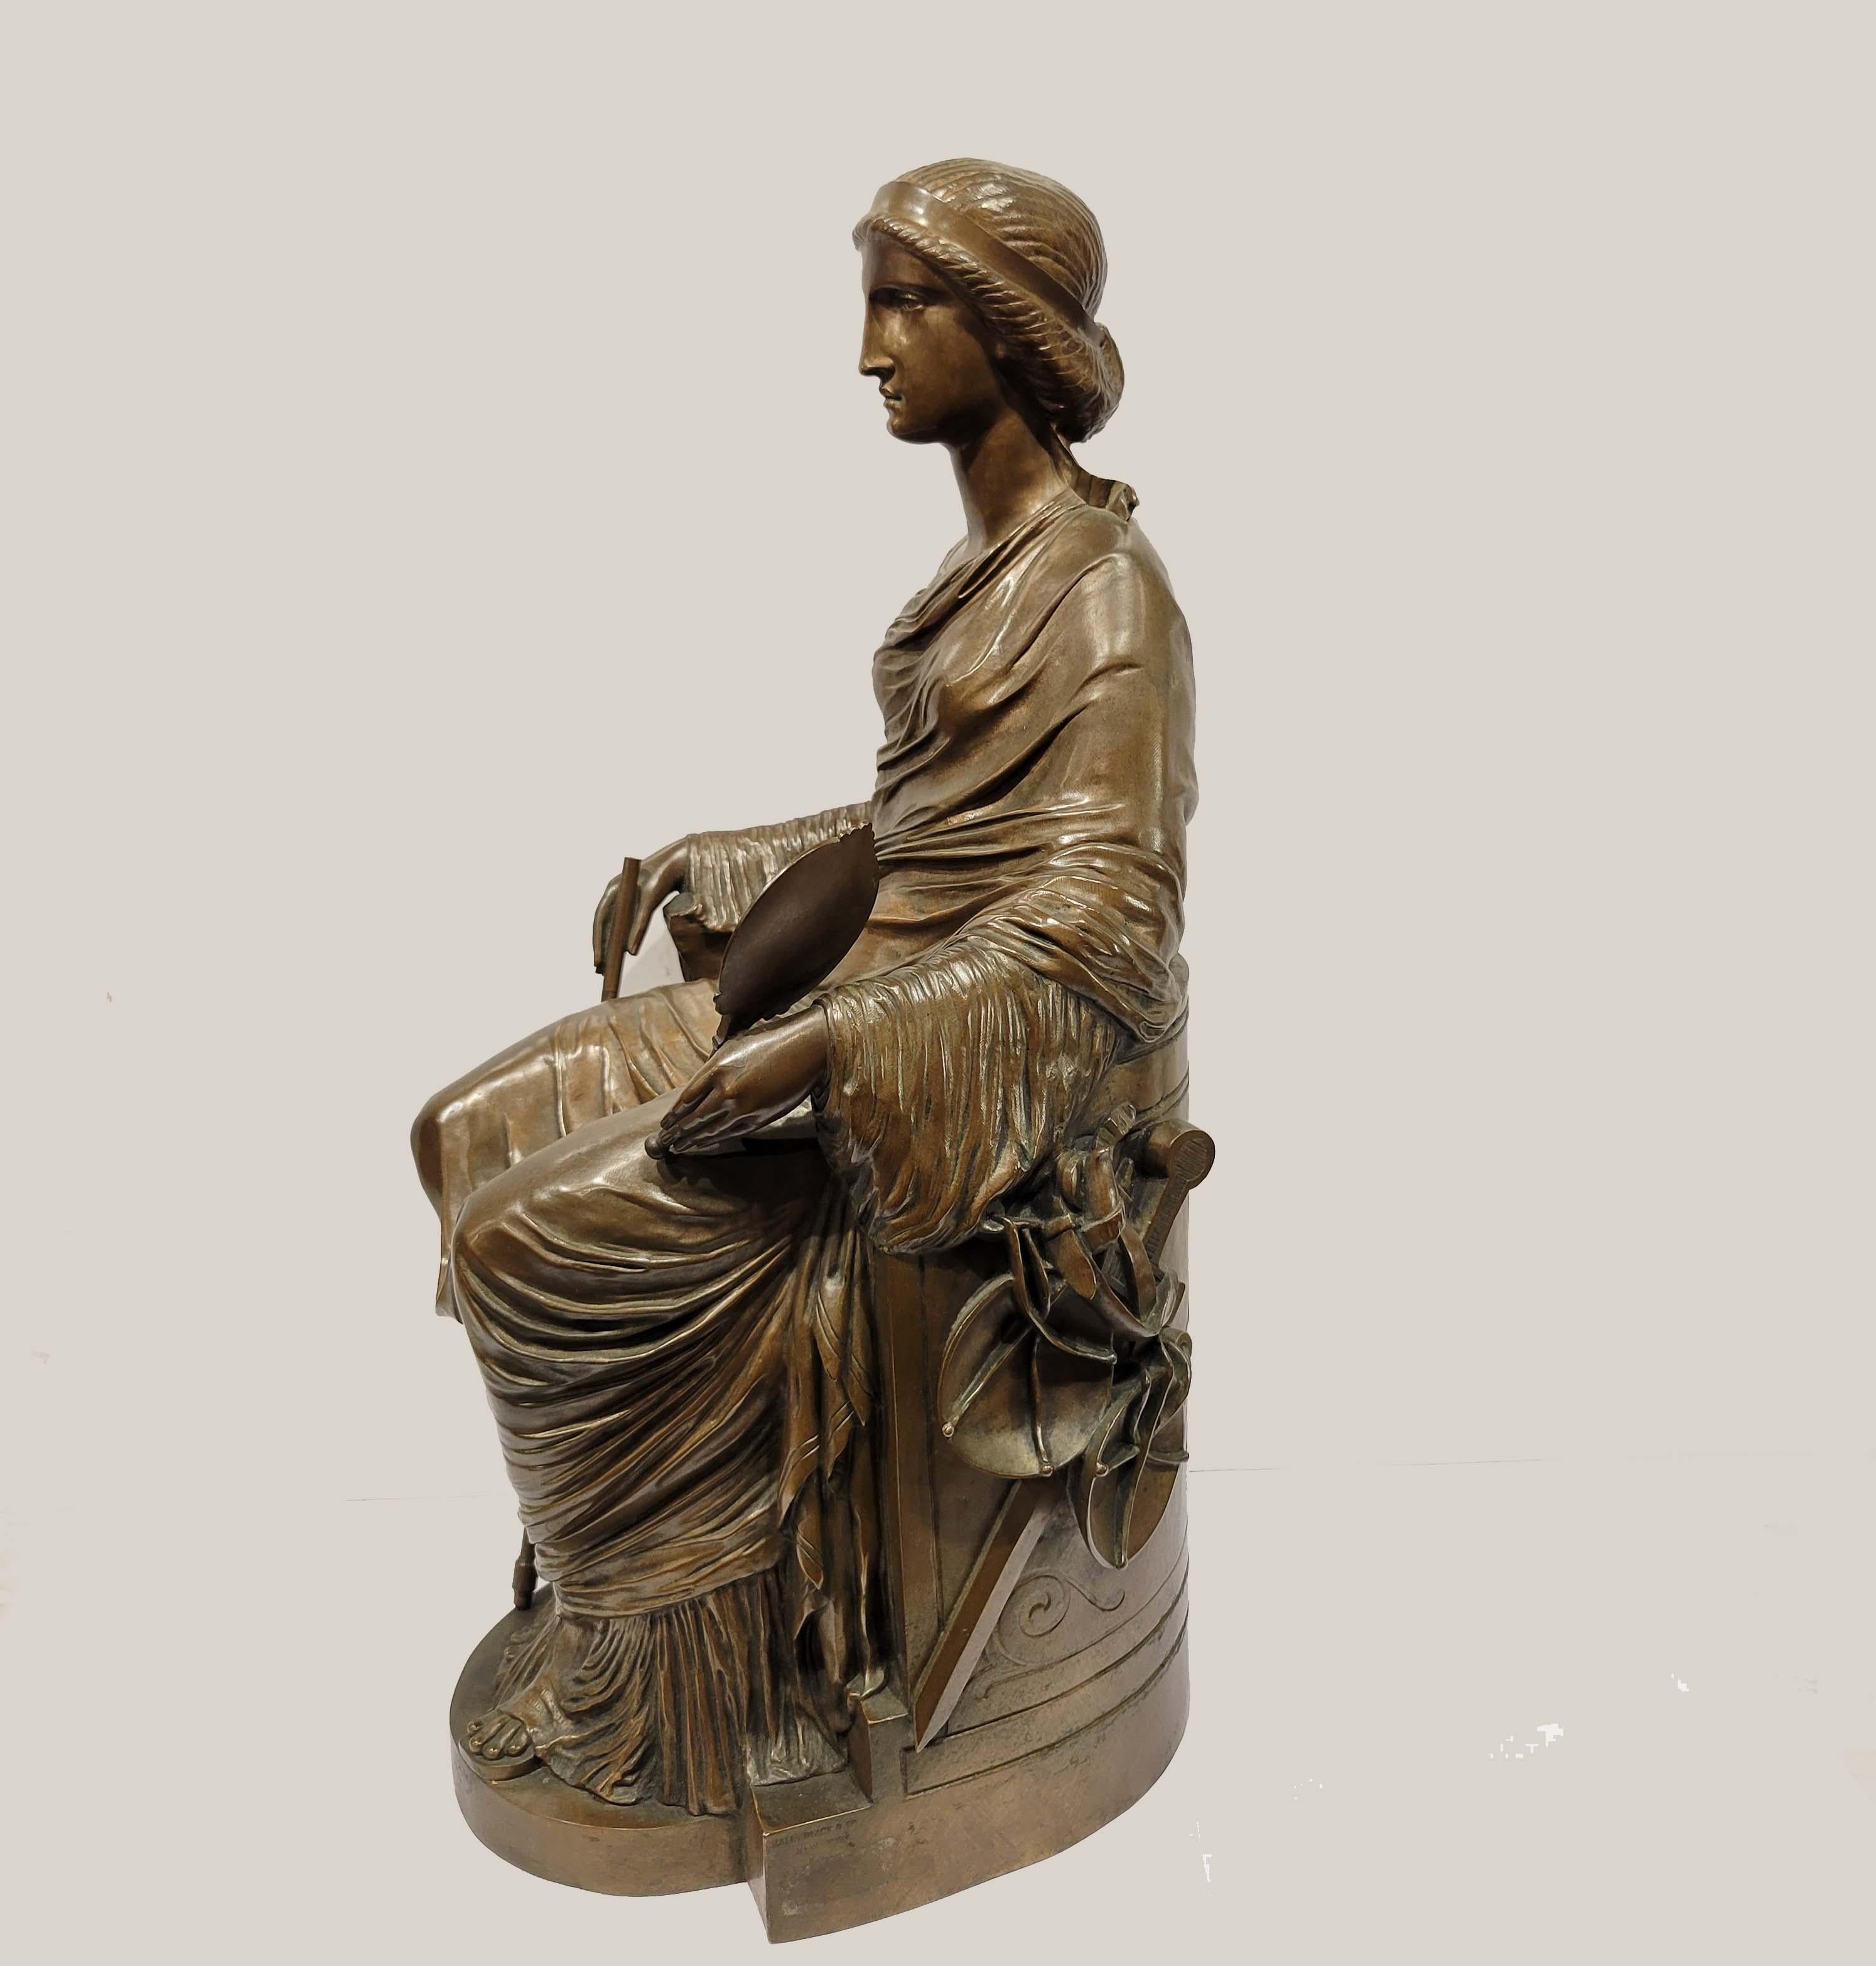 A wonderful quality cast bronze figure of lady justice circa 1890's, French lost wax casting with beautiful medium brown patina. This sculpture is quite rare and magnificent, which we have not seen in the marketplace before. It bears the stamp of